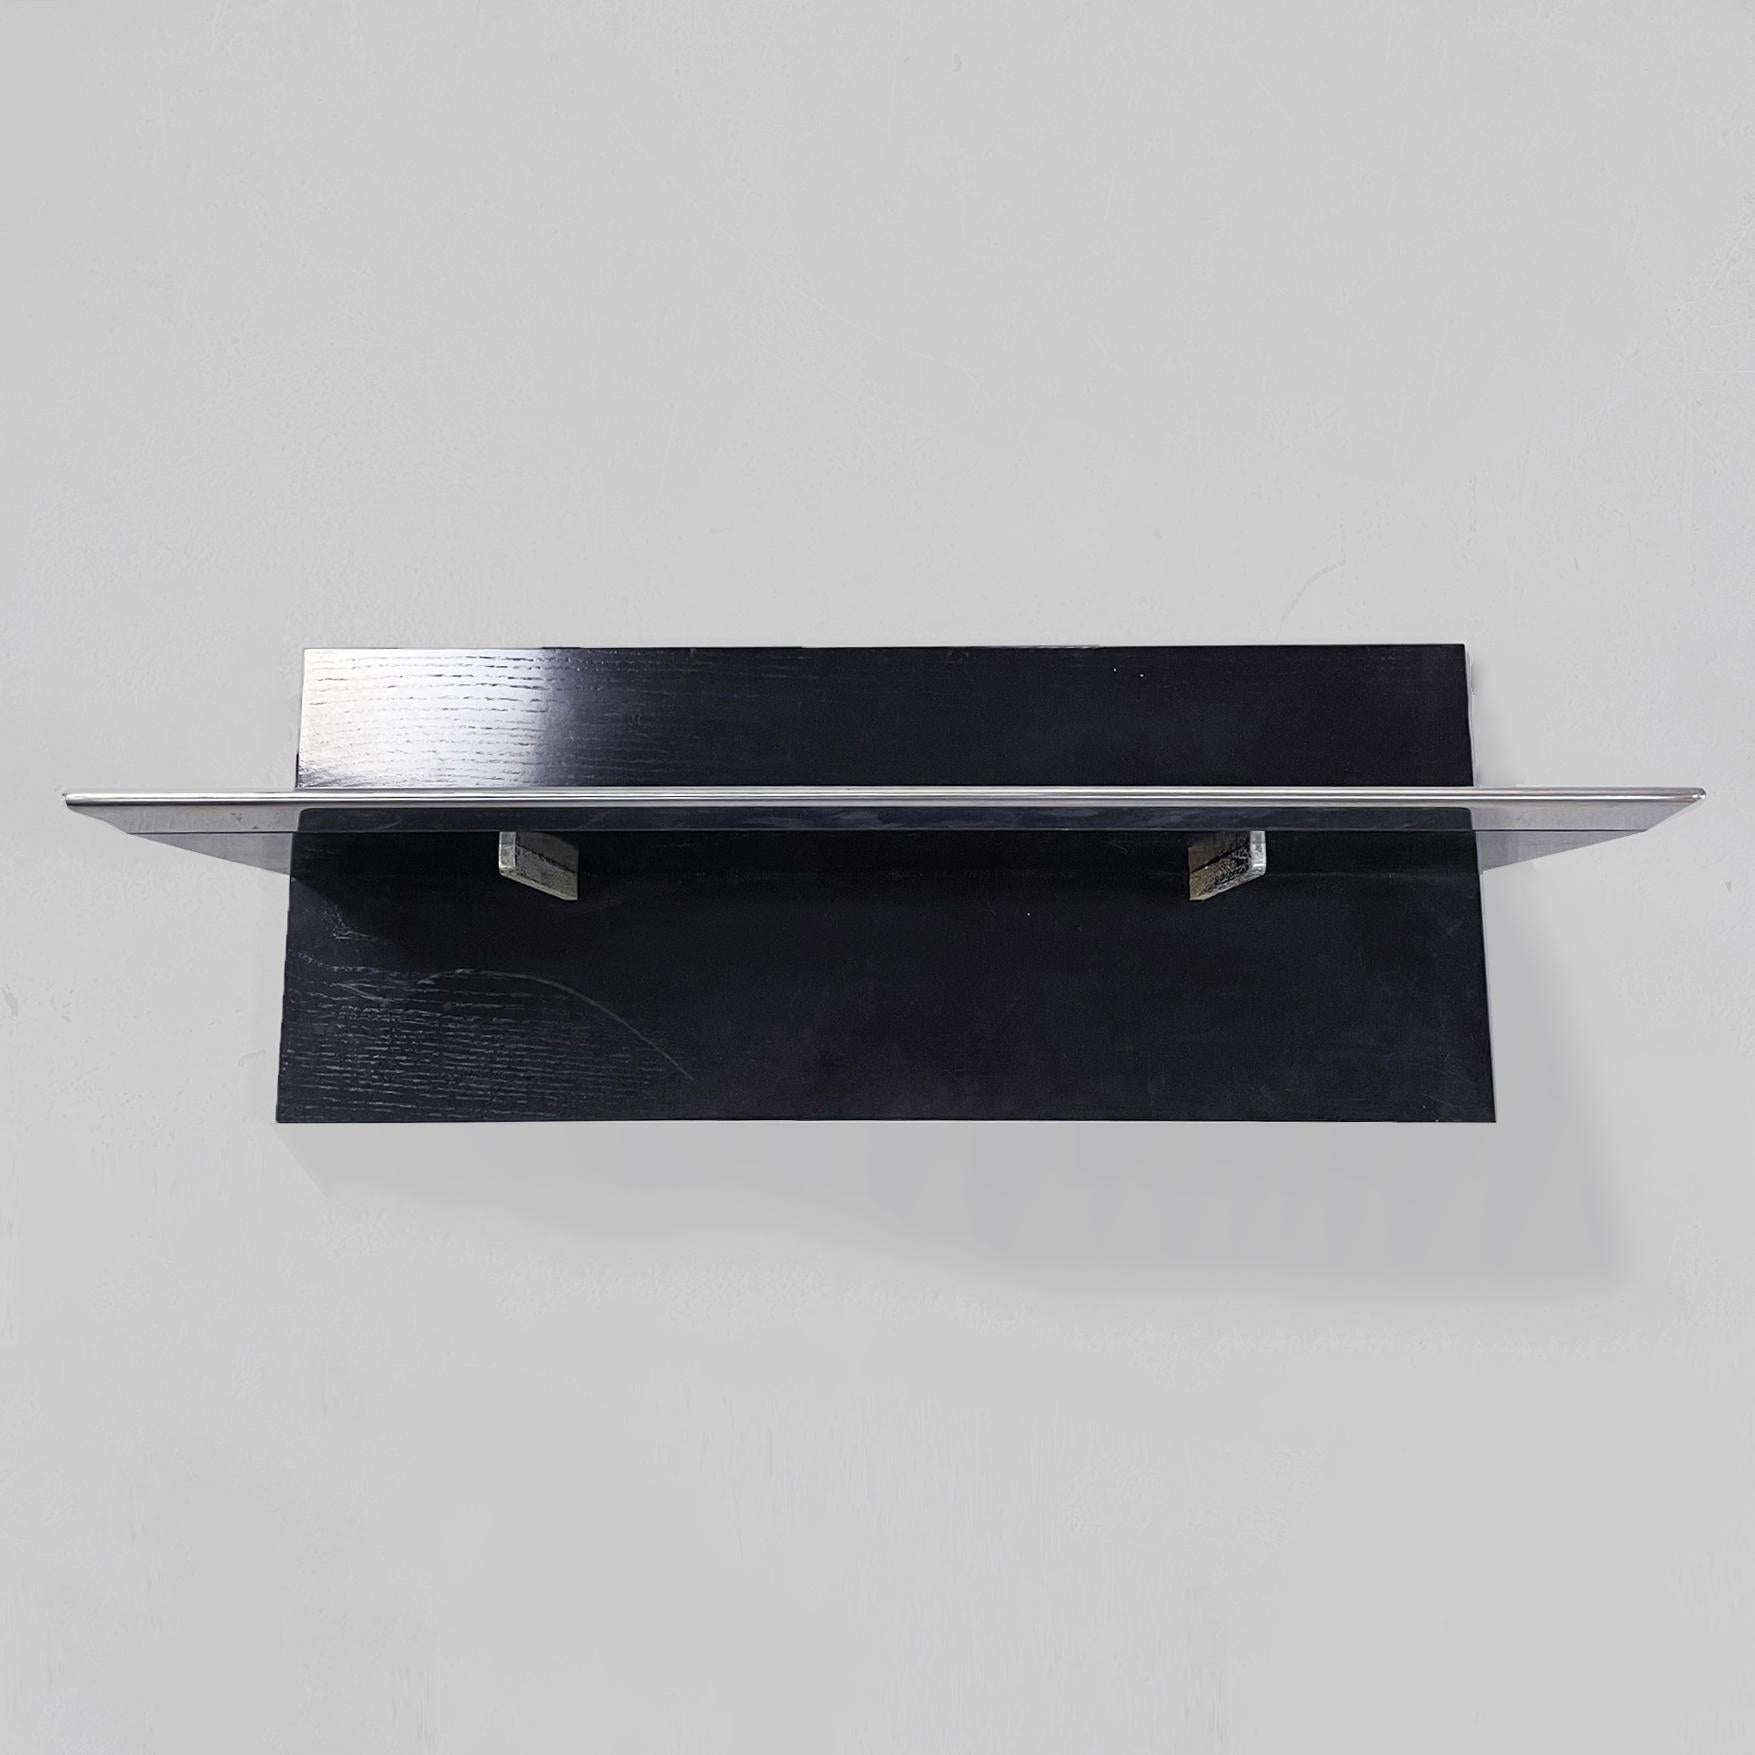 Italian mid-century pair of wooden shelves, 1980s.
Pair of black painted wooden shelves with steel finishes in different sizes.

1980s.

Good conditions, the supports show signs of oxidation.

Measurements 75 x 31 x 28,5H cm.